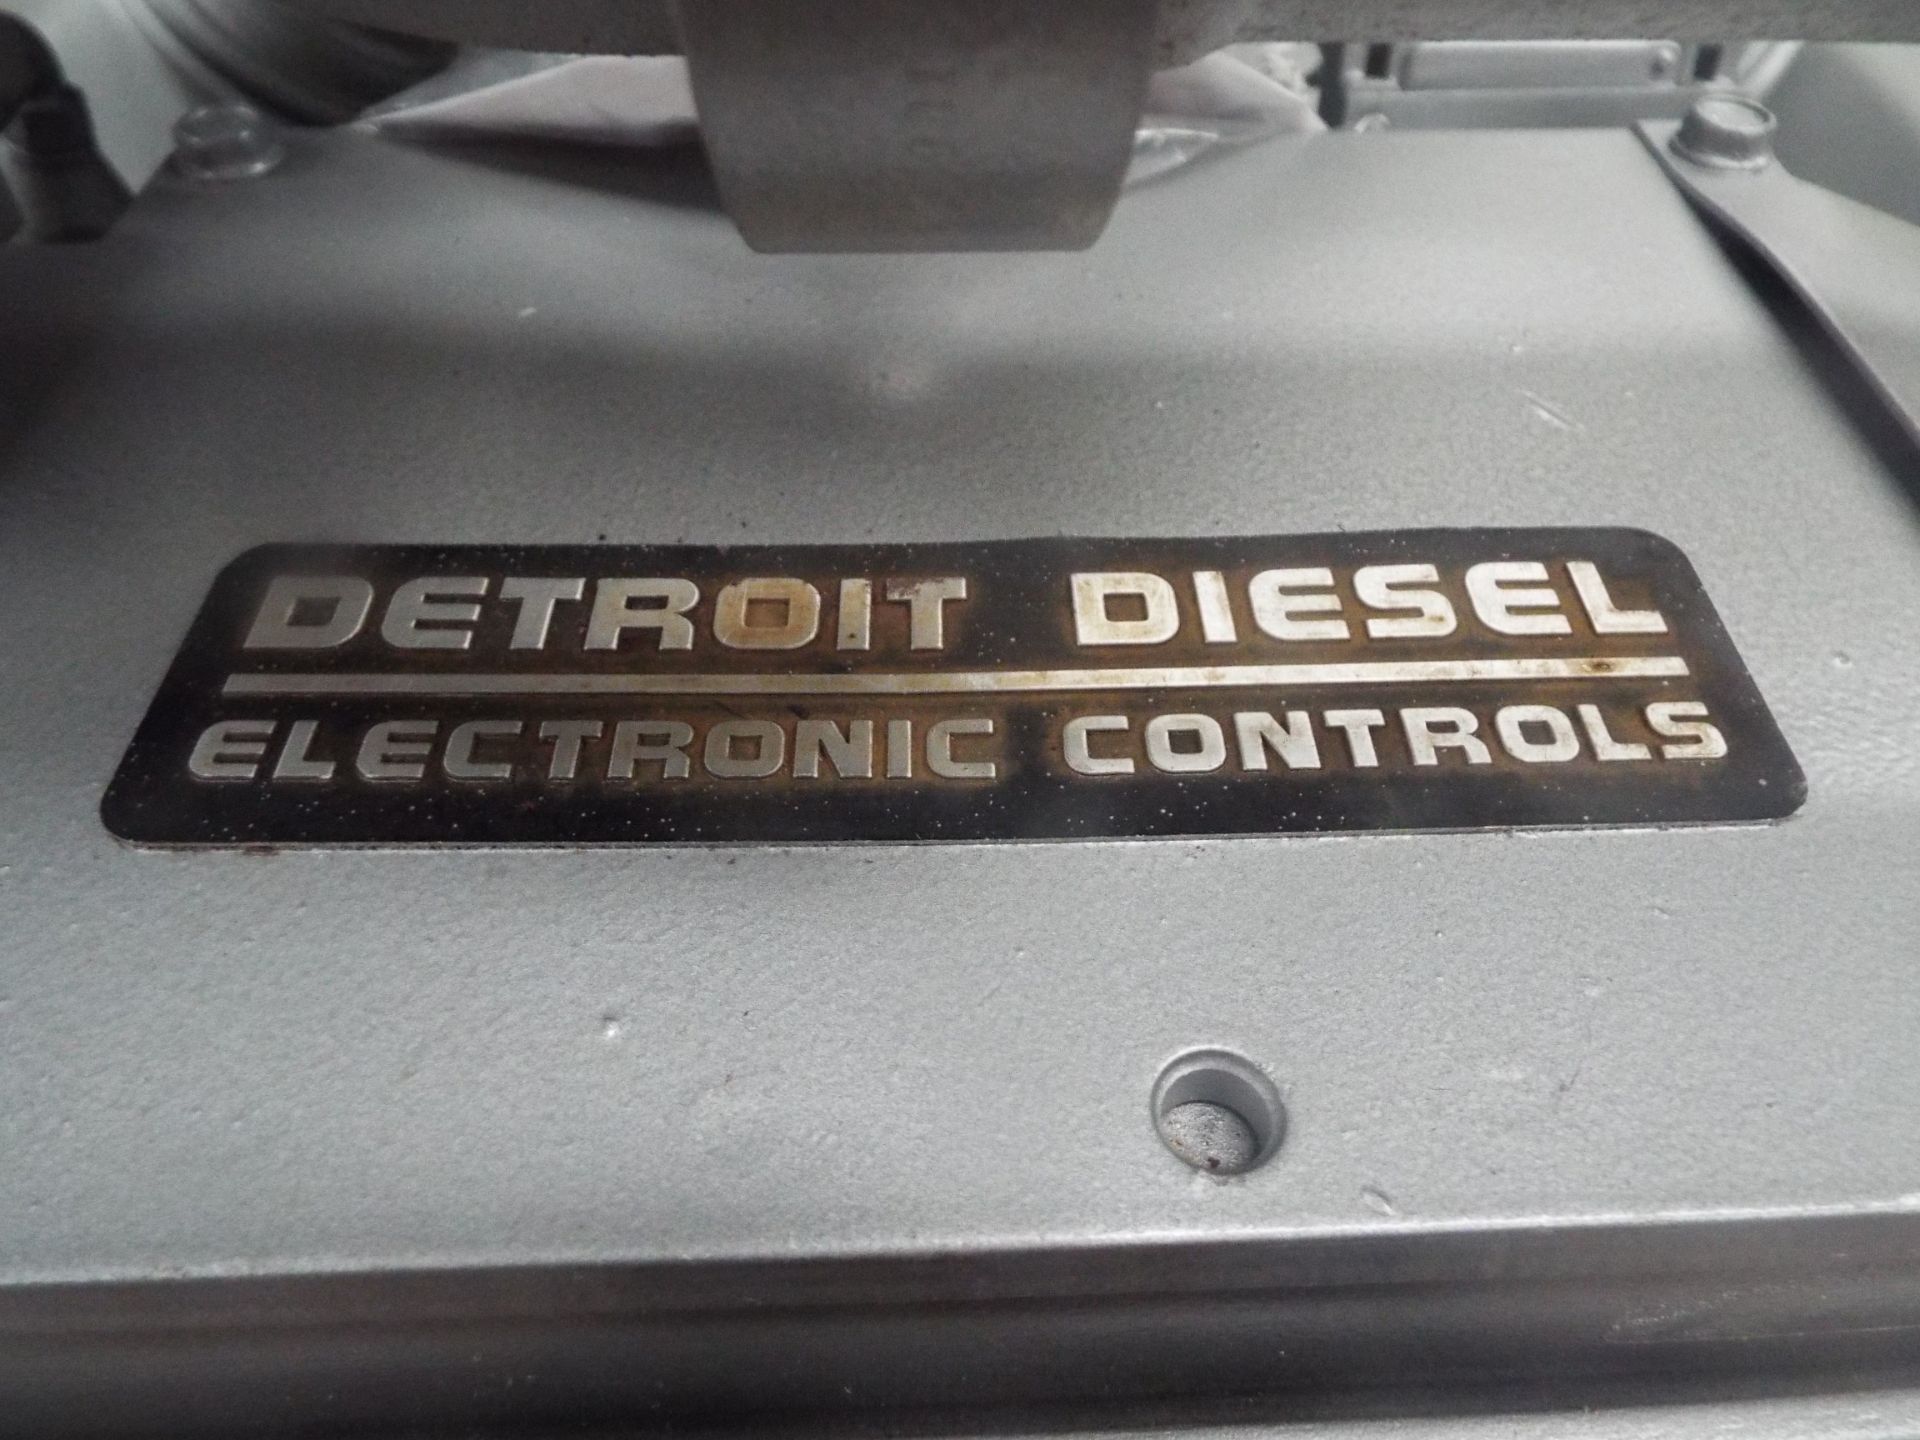 Detroit 8V-92TA DDEC V8 Turbo Diesel Engine Complete with Ancillaries and Starter Motor - Image 16 of 20